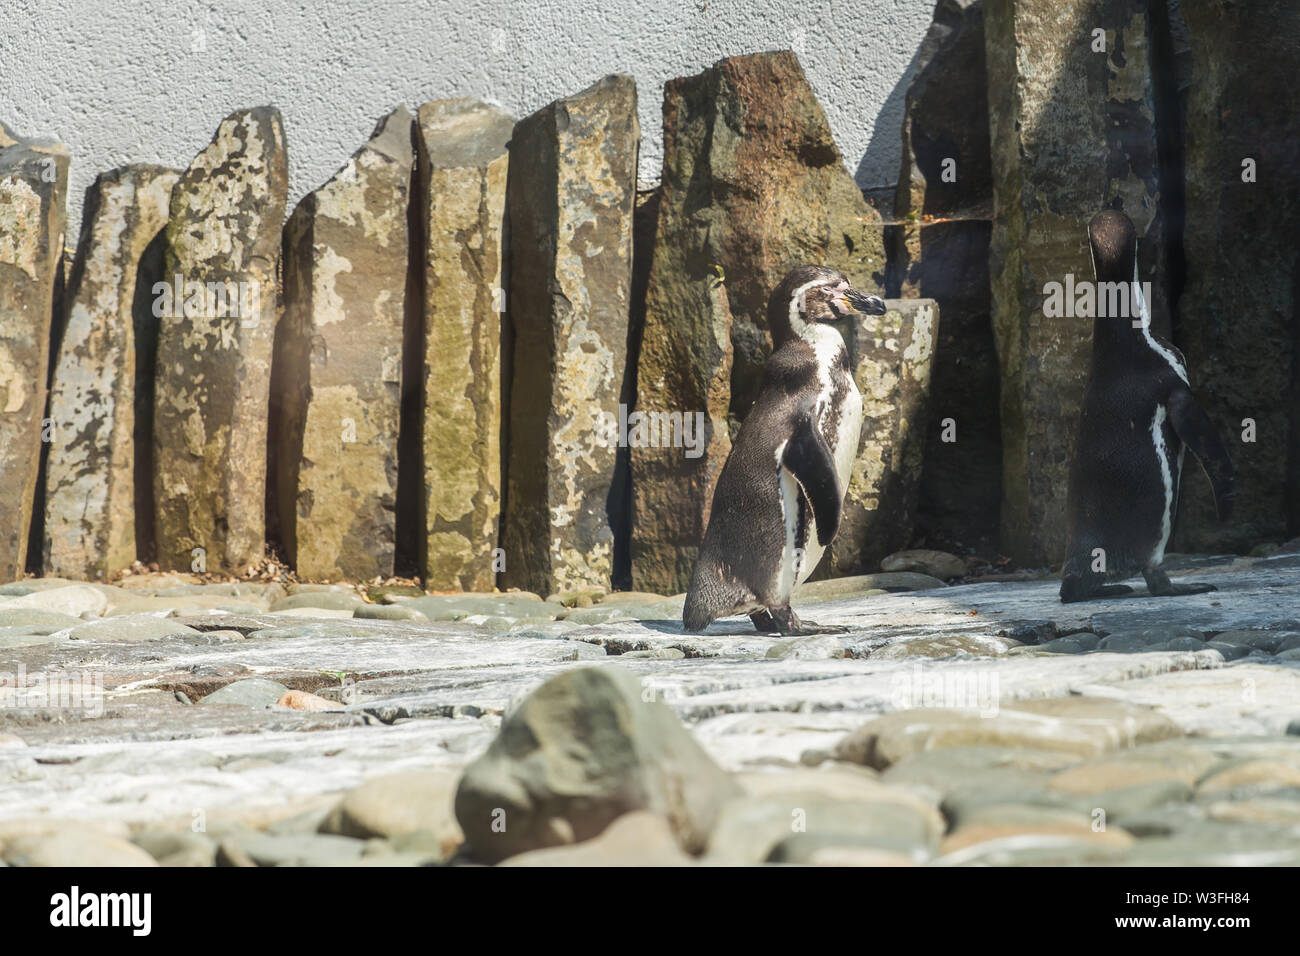 Cute african penguins walking at the zoo. Concept of animal life in a zoo. Animal protection. Stock Photo